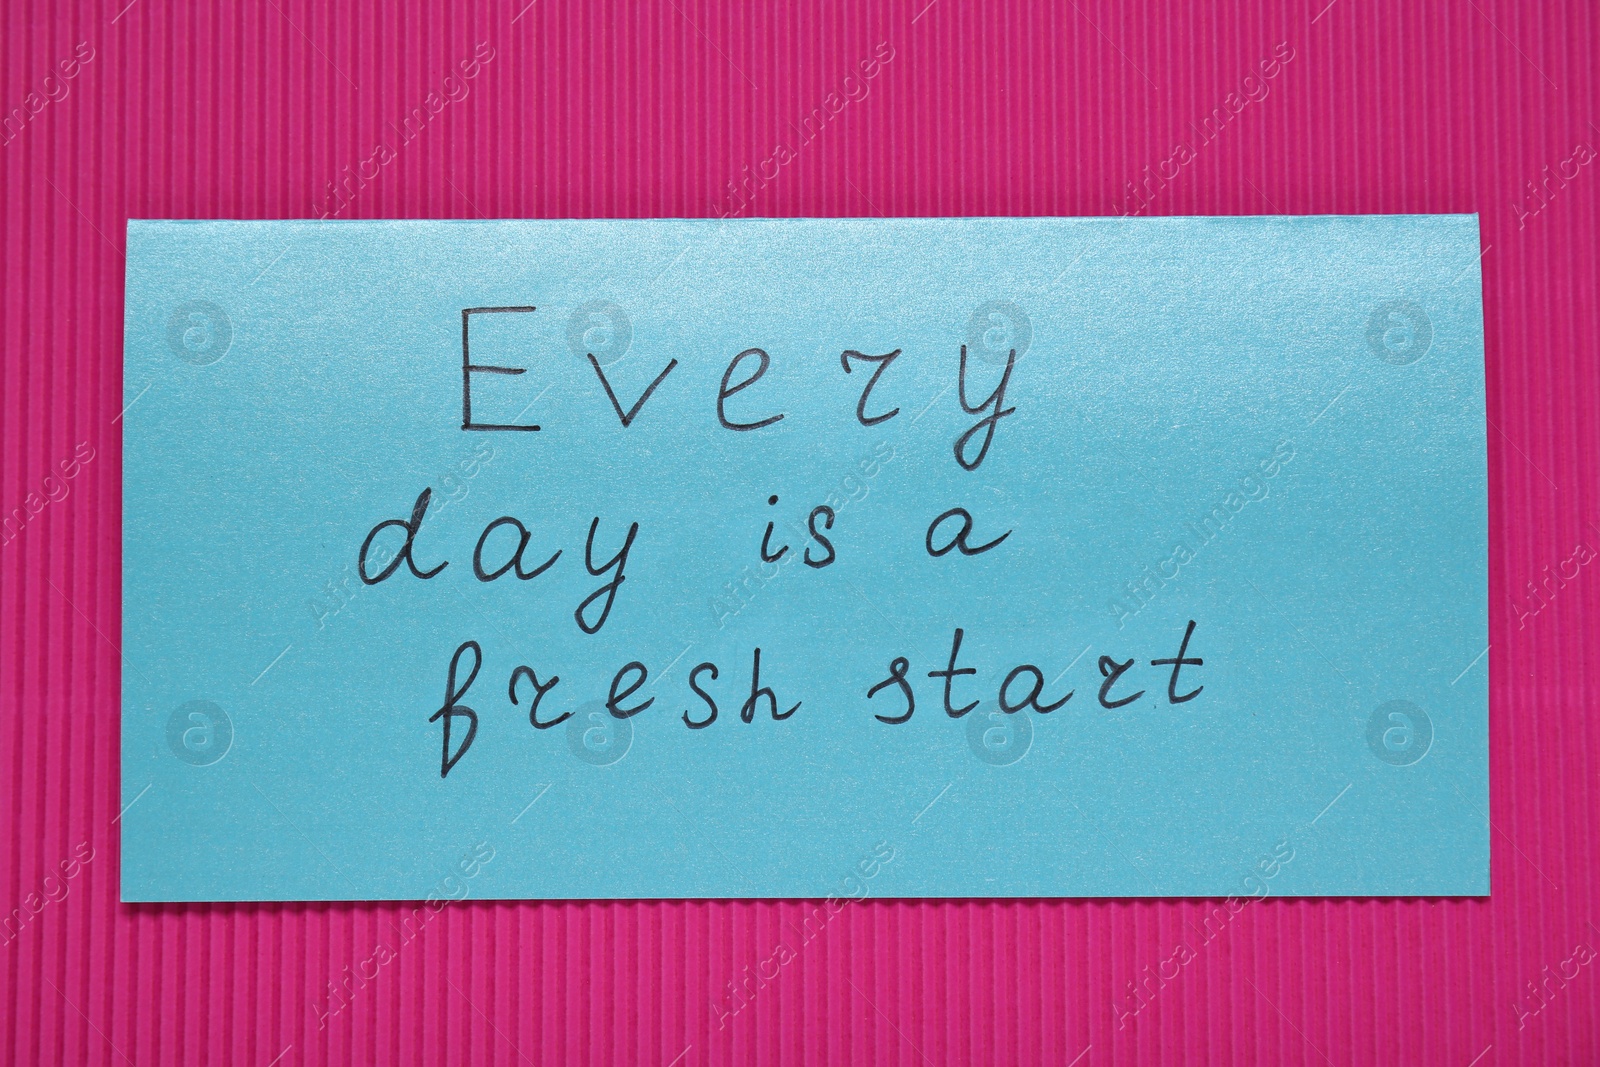 Photo of Card with phrase Every Day Is A Fresh Start on pink background, top view. Motivational quote